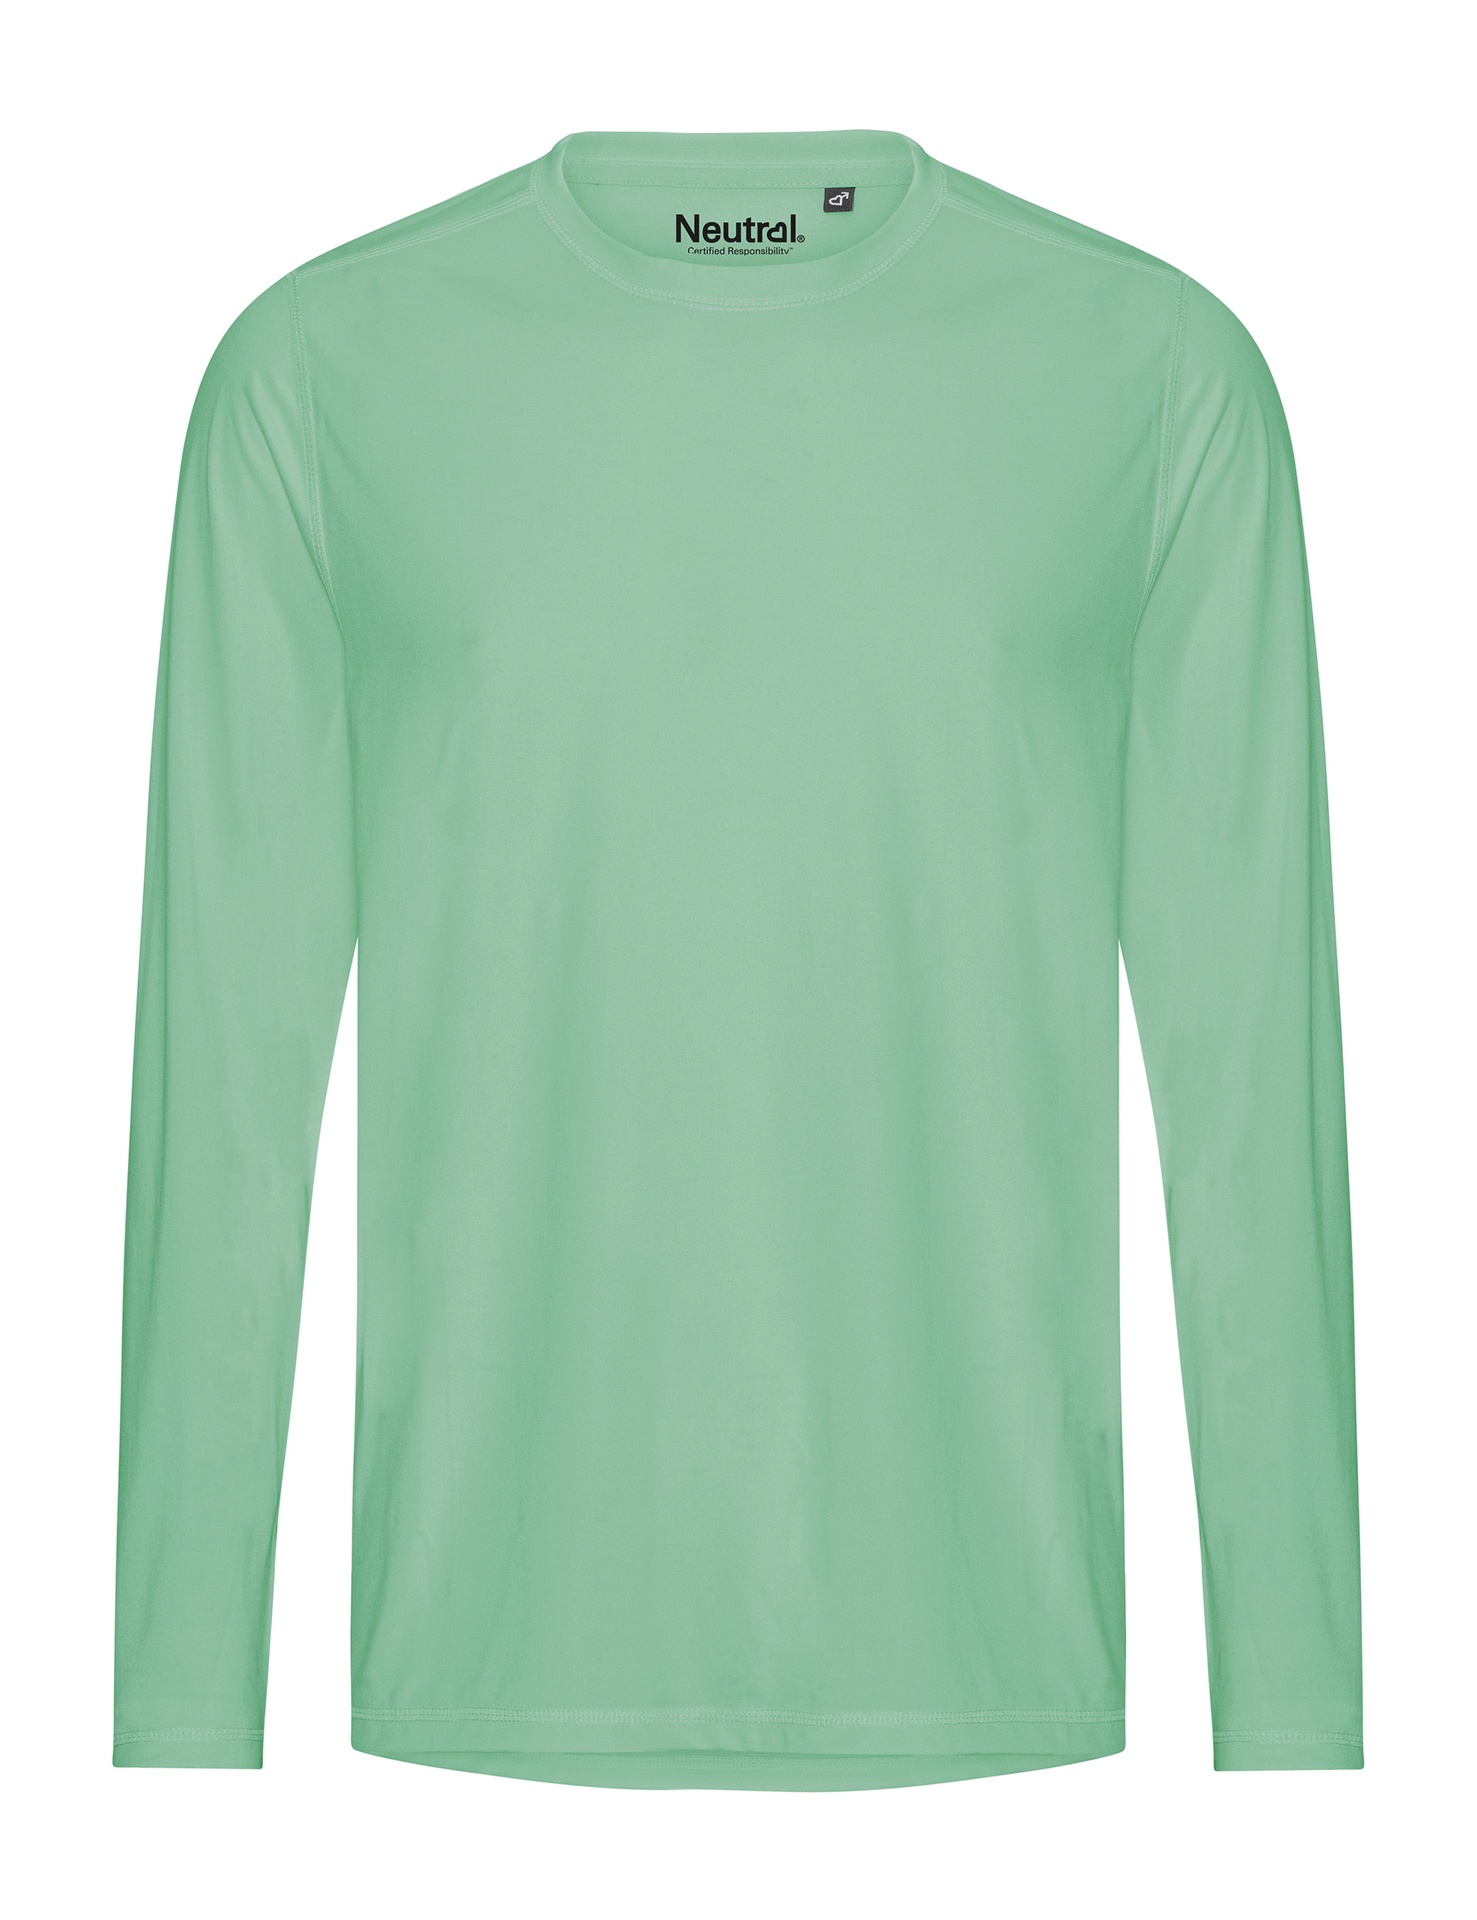 [PR/03844] Recycled Performance LS T-Shirt (Dusty Mint 40, S)